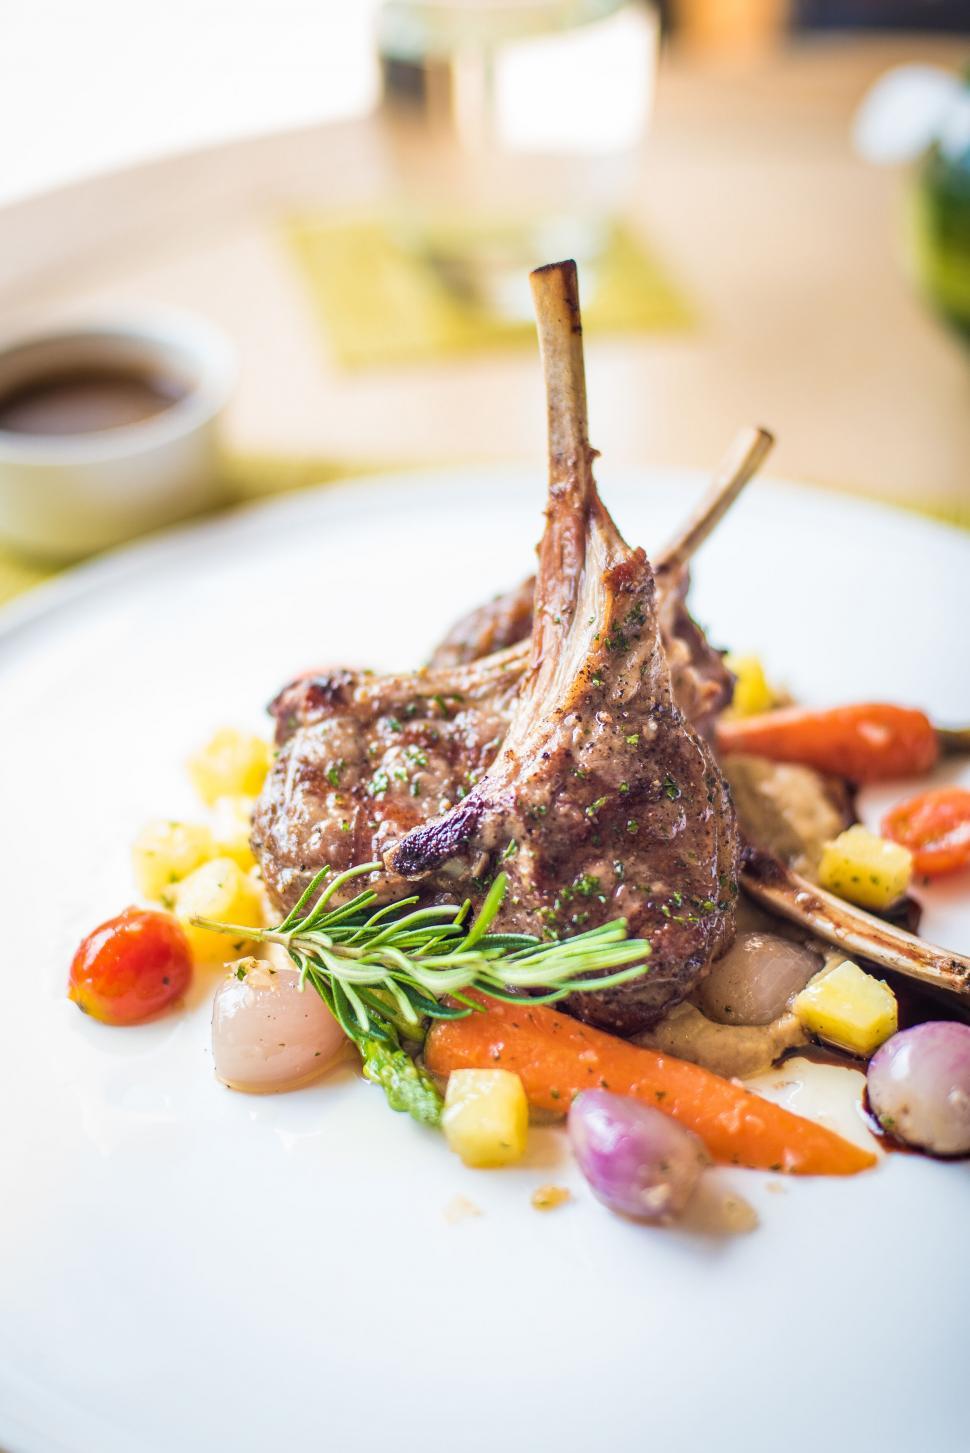 Free Image of Grilled lamb chops with vegetables on plate 